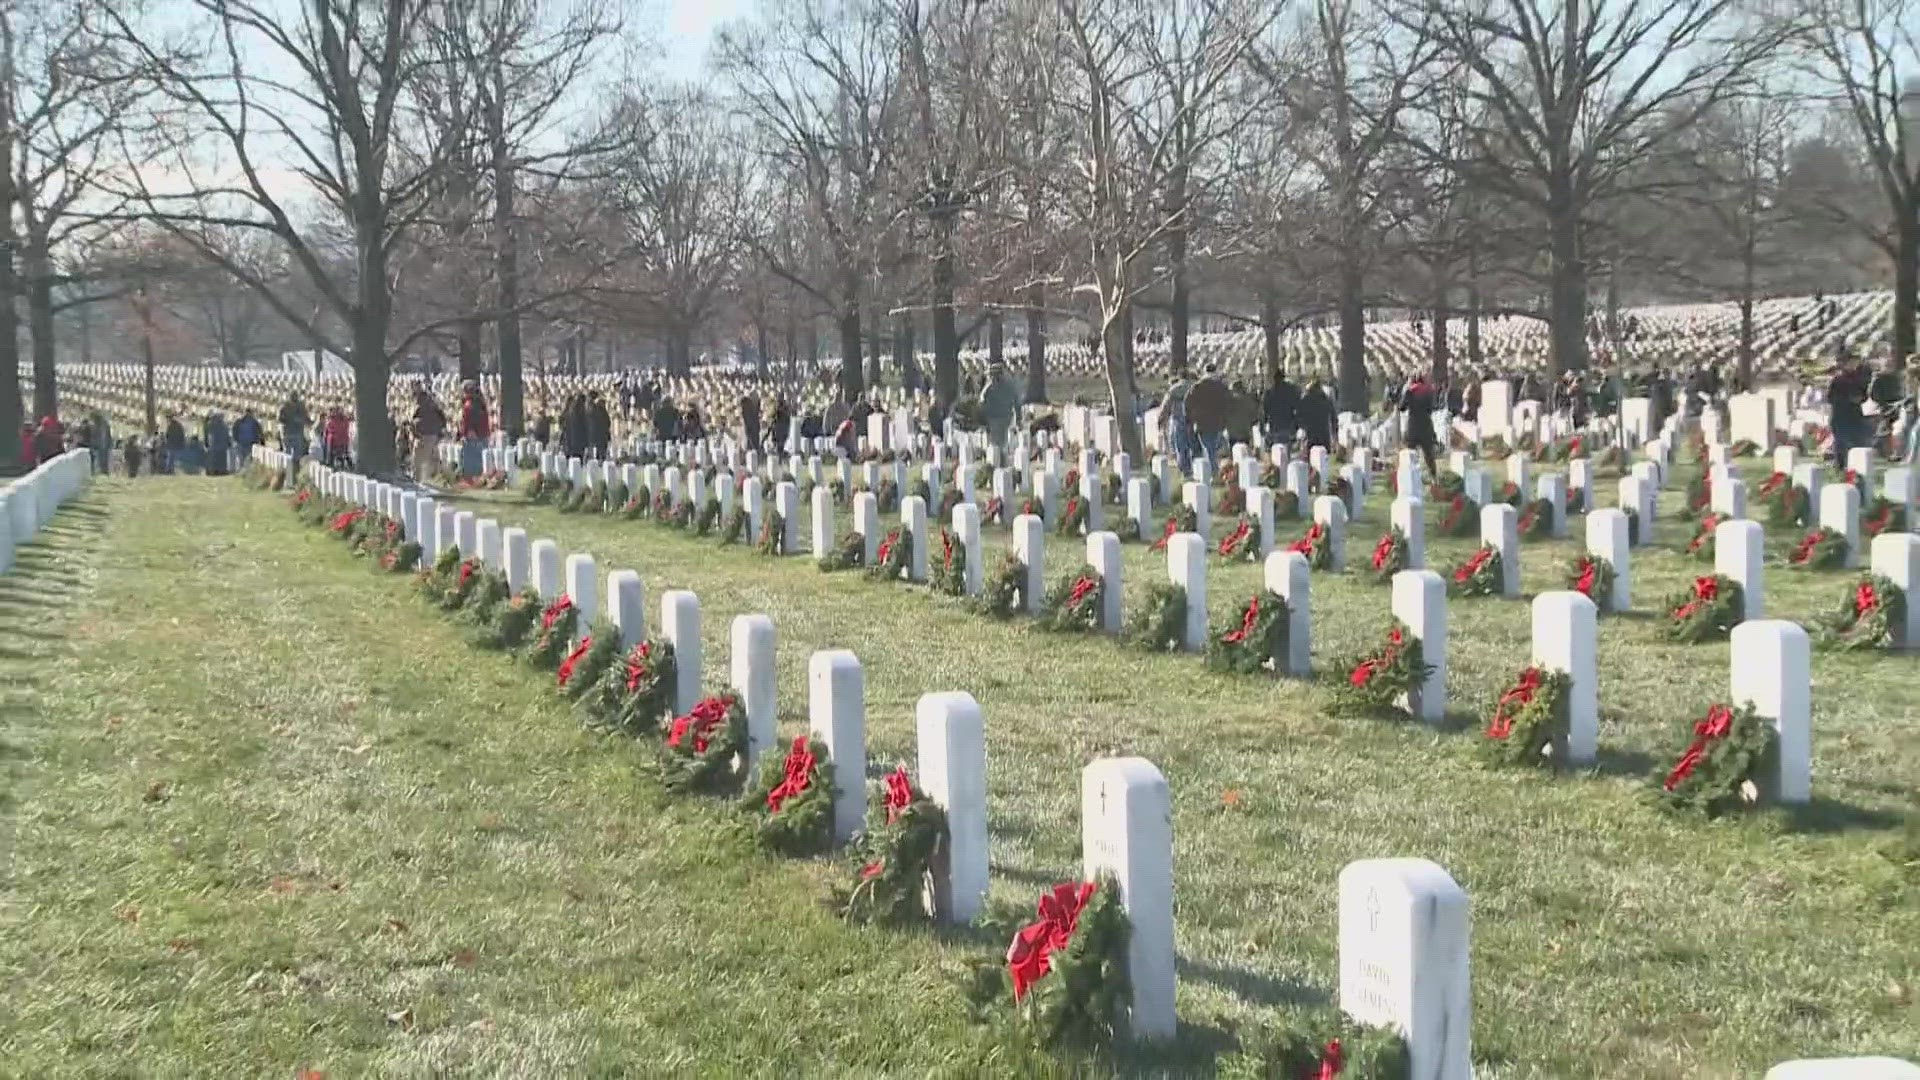 Each year, hundreds of thousands of wreaths are loaded onto truck and taken to Washington, D.C. They’ll all be placed on tombstones at Arlington National Cemetery.